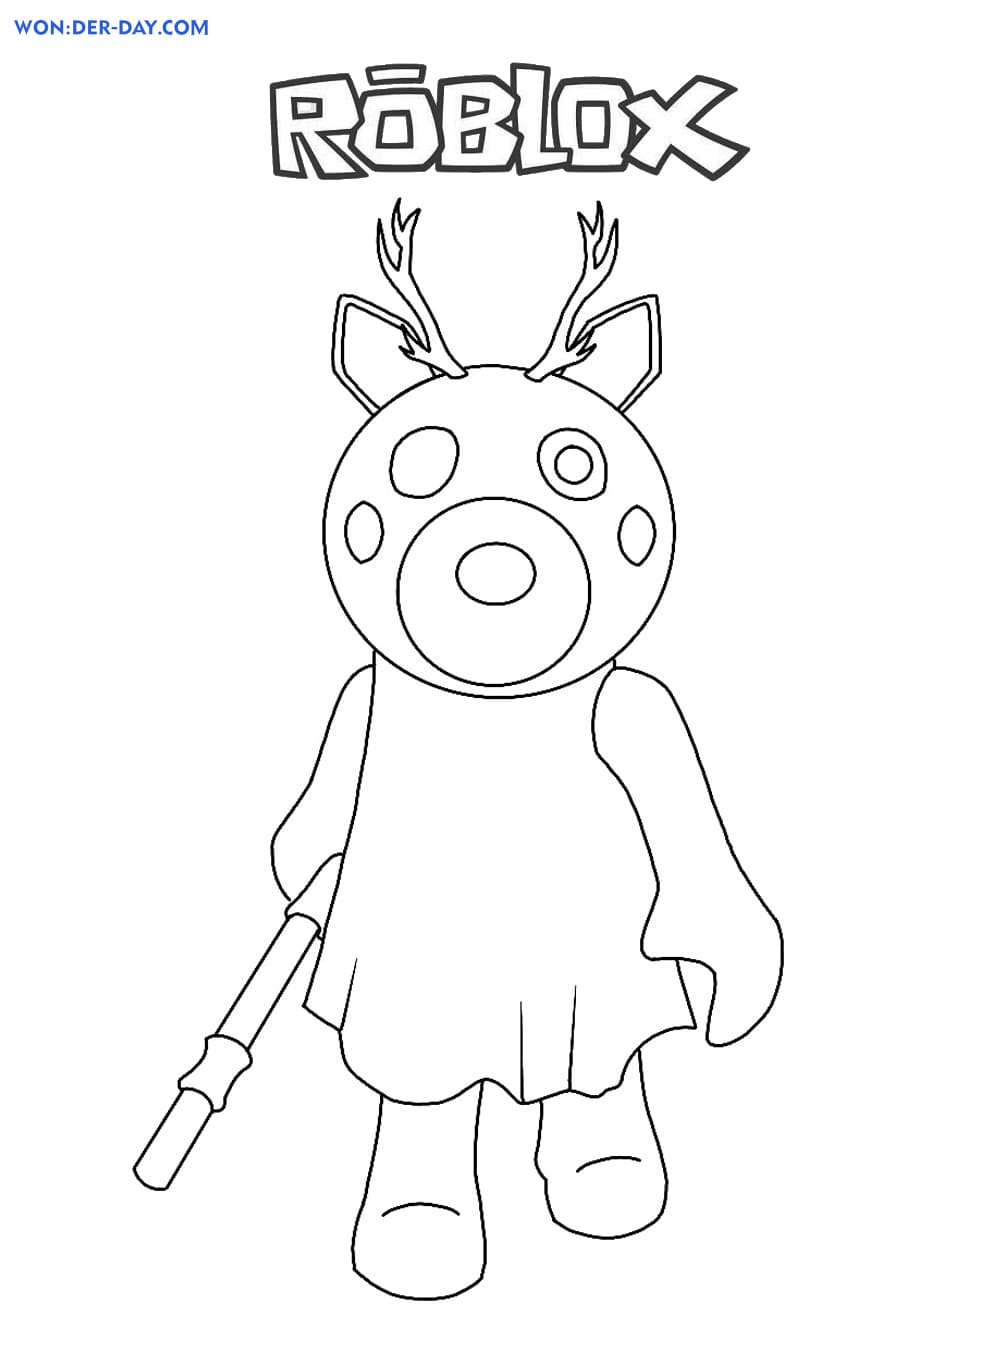 Piggy Roblox Coloring Pages Wonder Day Coloring Pages For Children And Adults - roblox piggy coloring pages mimi